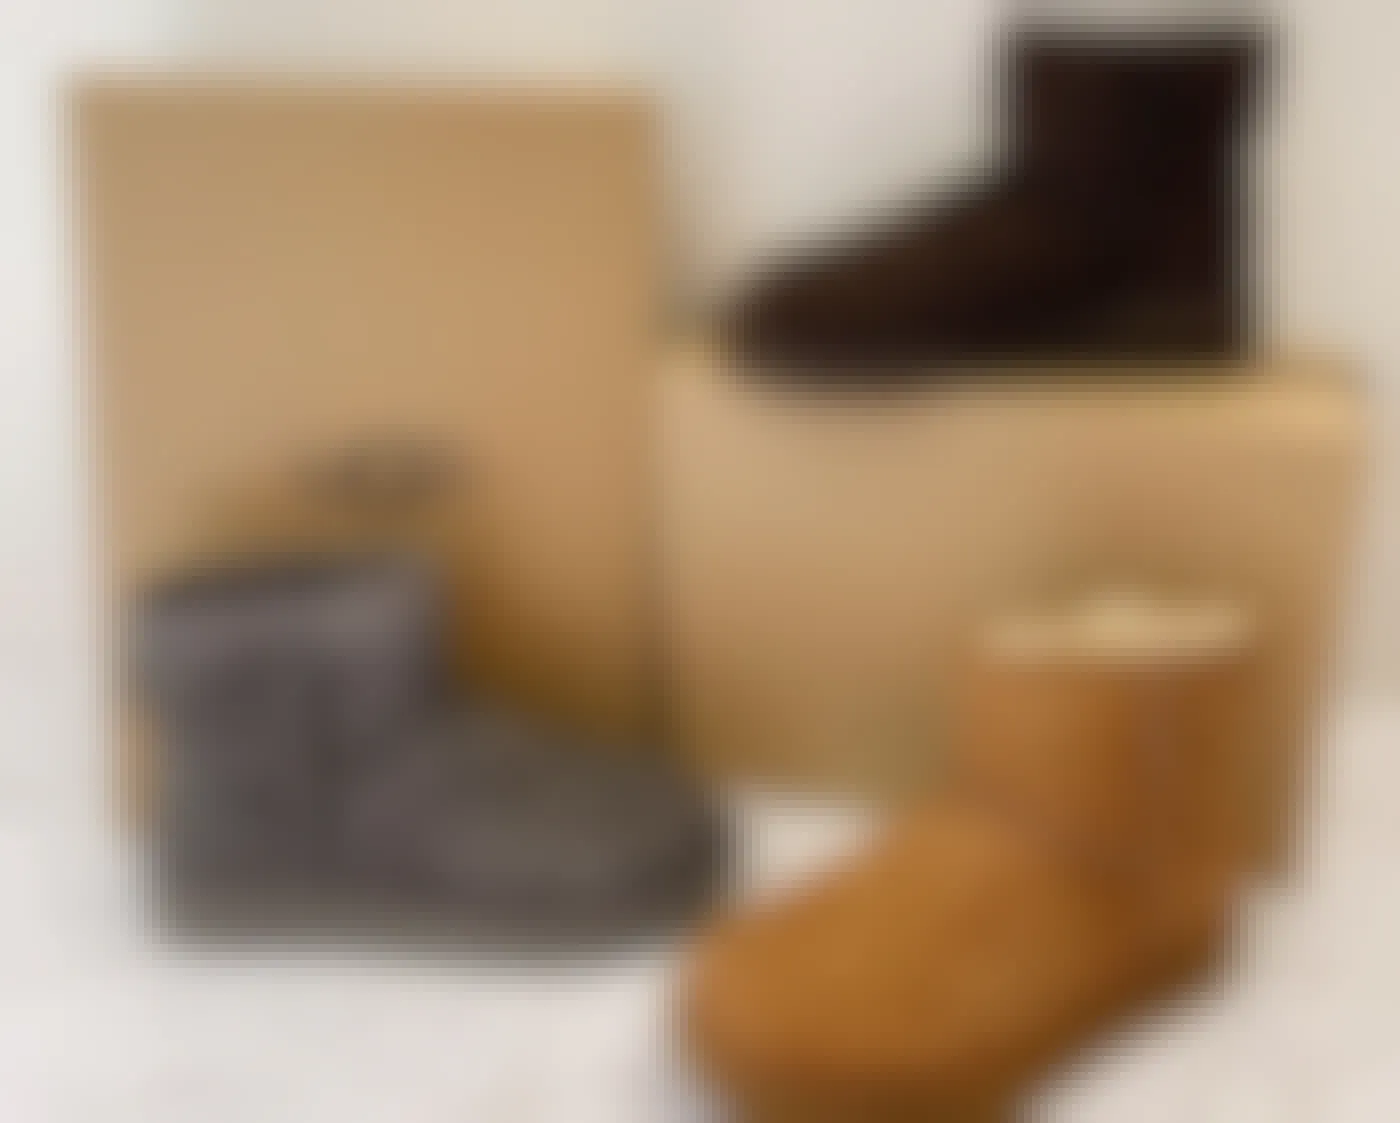 proozy low ugg boots in brown, tan, and gray with boxes